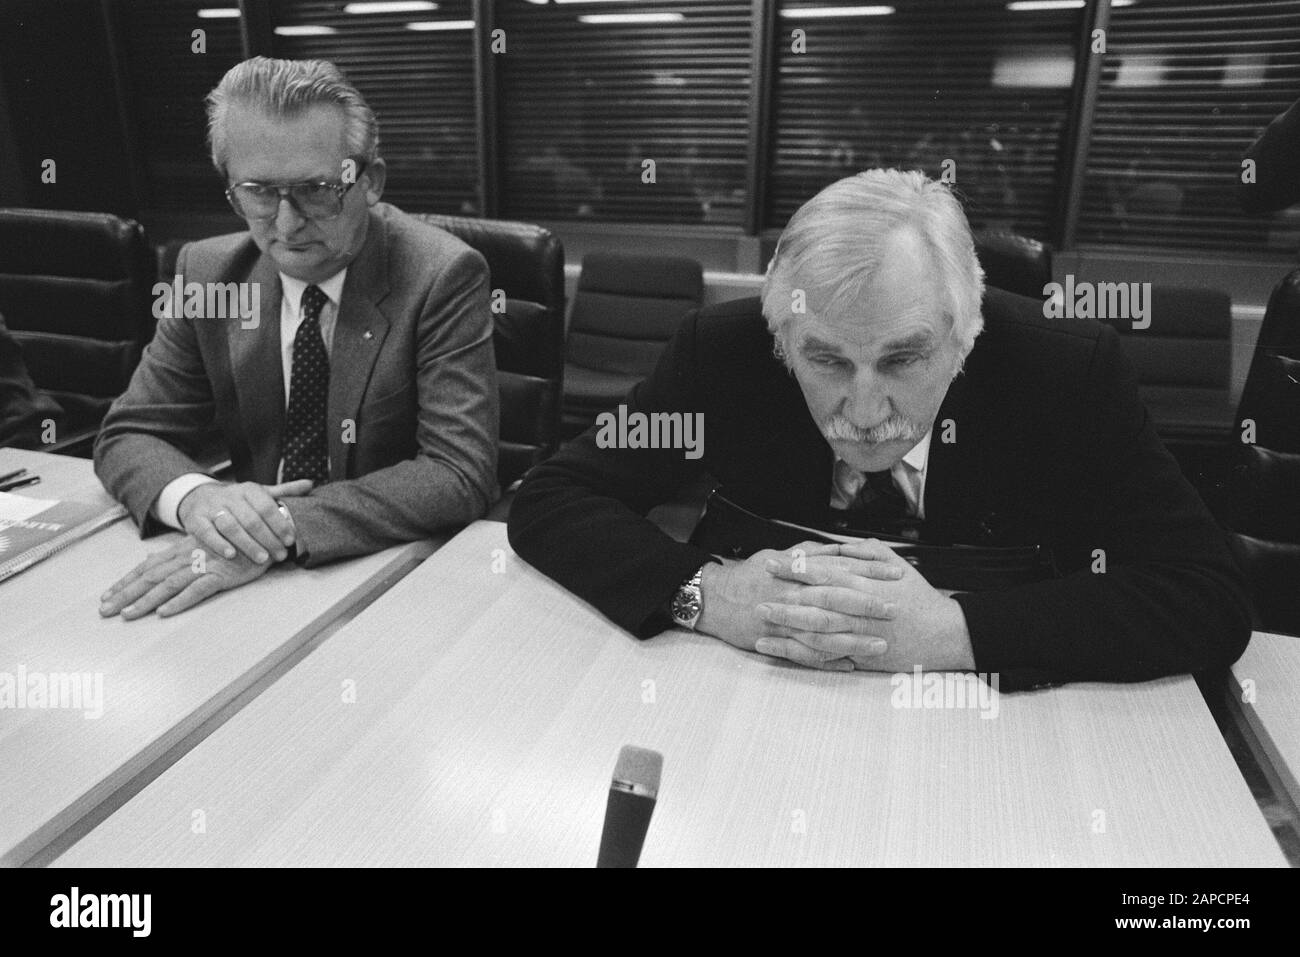 Consultation Minister Rietkerk with civil servants' associations Description: ABVAKaboChairman Jaap van der Scheur and Chairman of the Christian Federation for Government Staff (CFO) T. de Jong (l) Date: November 17, 1983 Keywords: officials, meetings, wage and price policy, trade unions, chairmen Personal name: Jong, A.C. de, Scheur, Jaap van de Institutioningsnaam: ABVaKabo Stock Photo